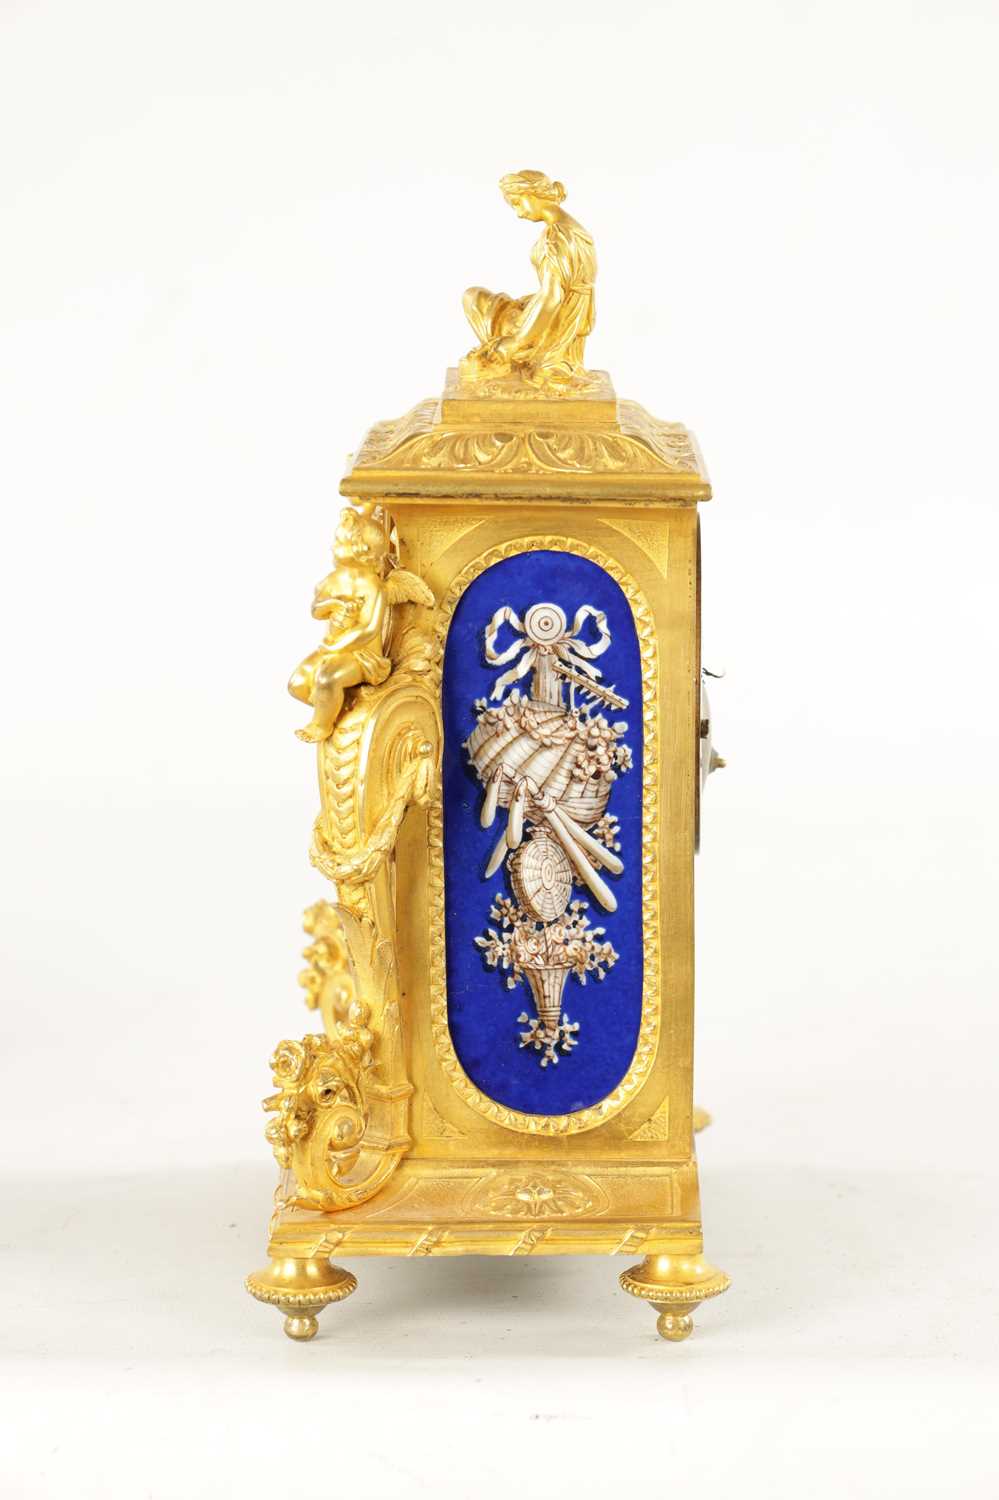 LEROY A PARIS. A 19TH CENTURY FRENCH ORMOLU AND PORCELAIN PANELLED MANTEL CLOCK - Image 7 of 10